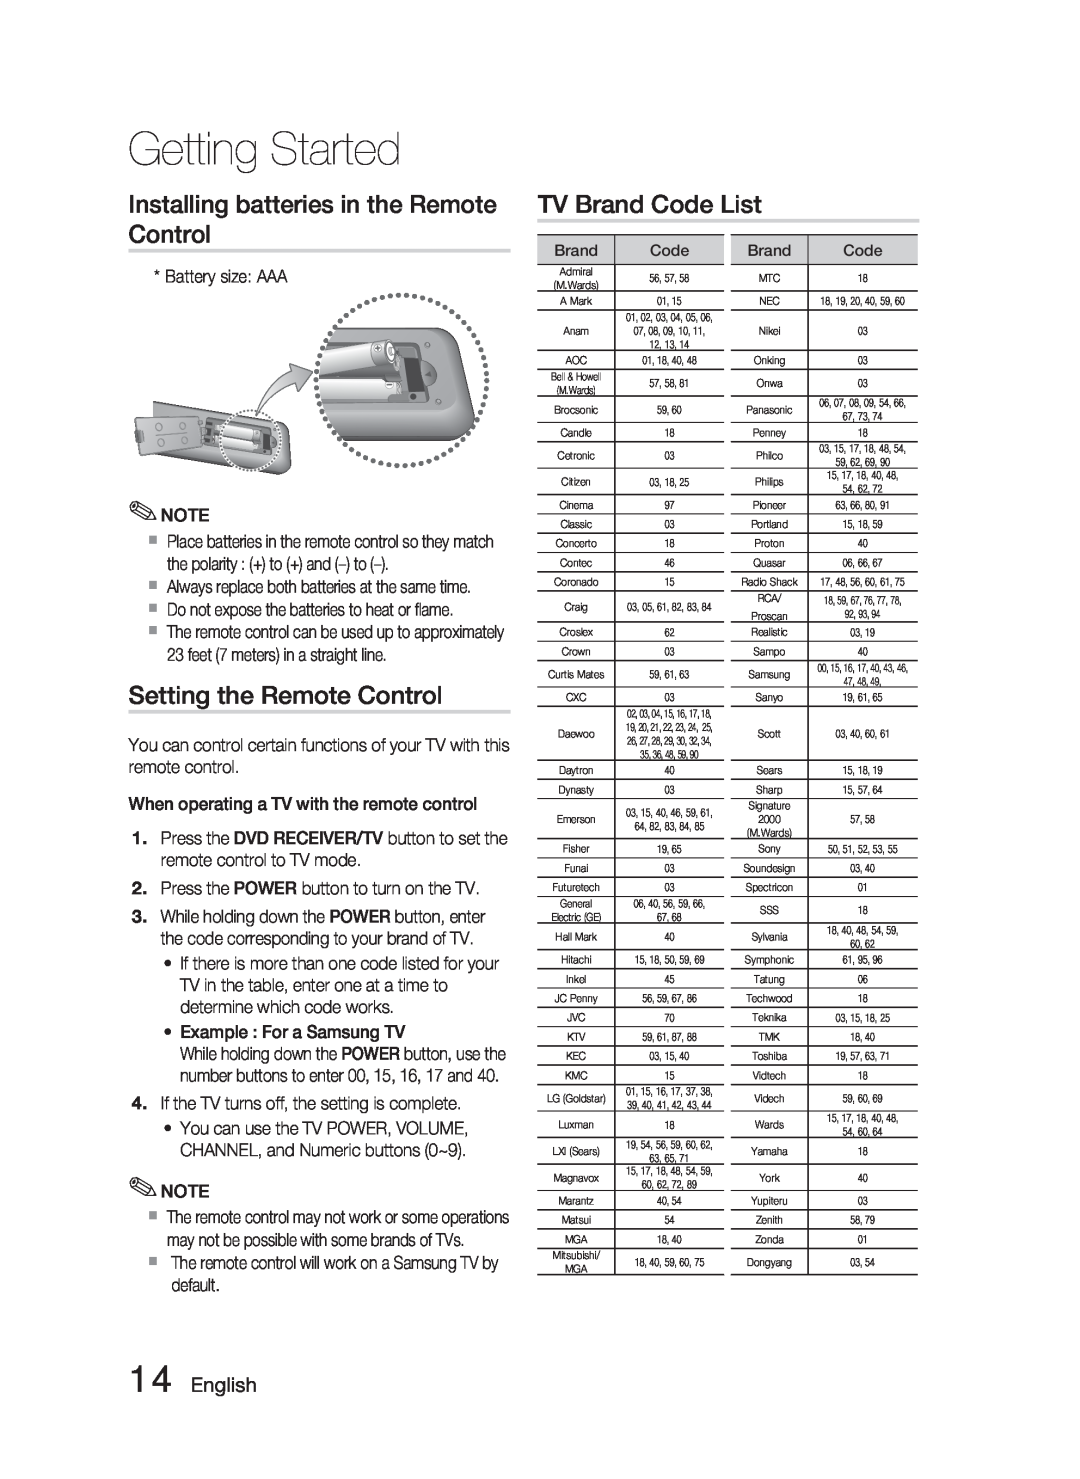 Samsung AH68-02259Q Installing batteries in the Remote Control, TV Brand Code List, Setting the Remote Control, English 